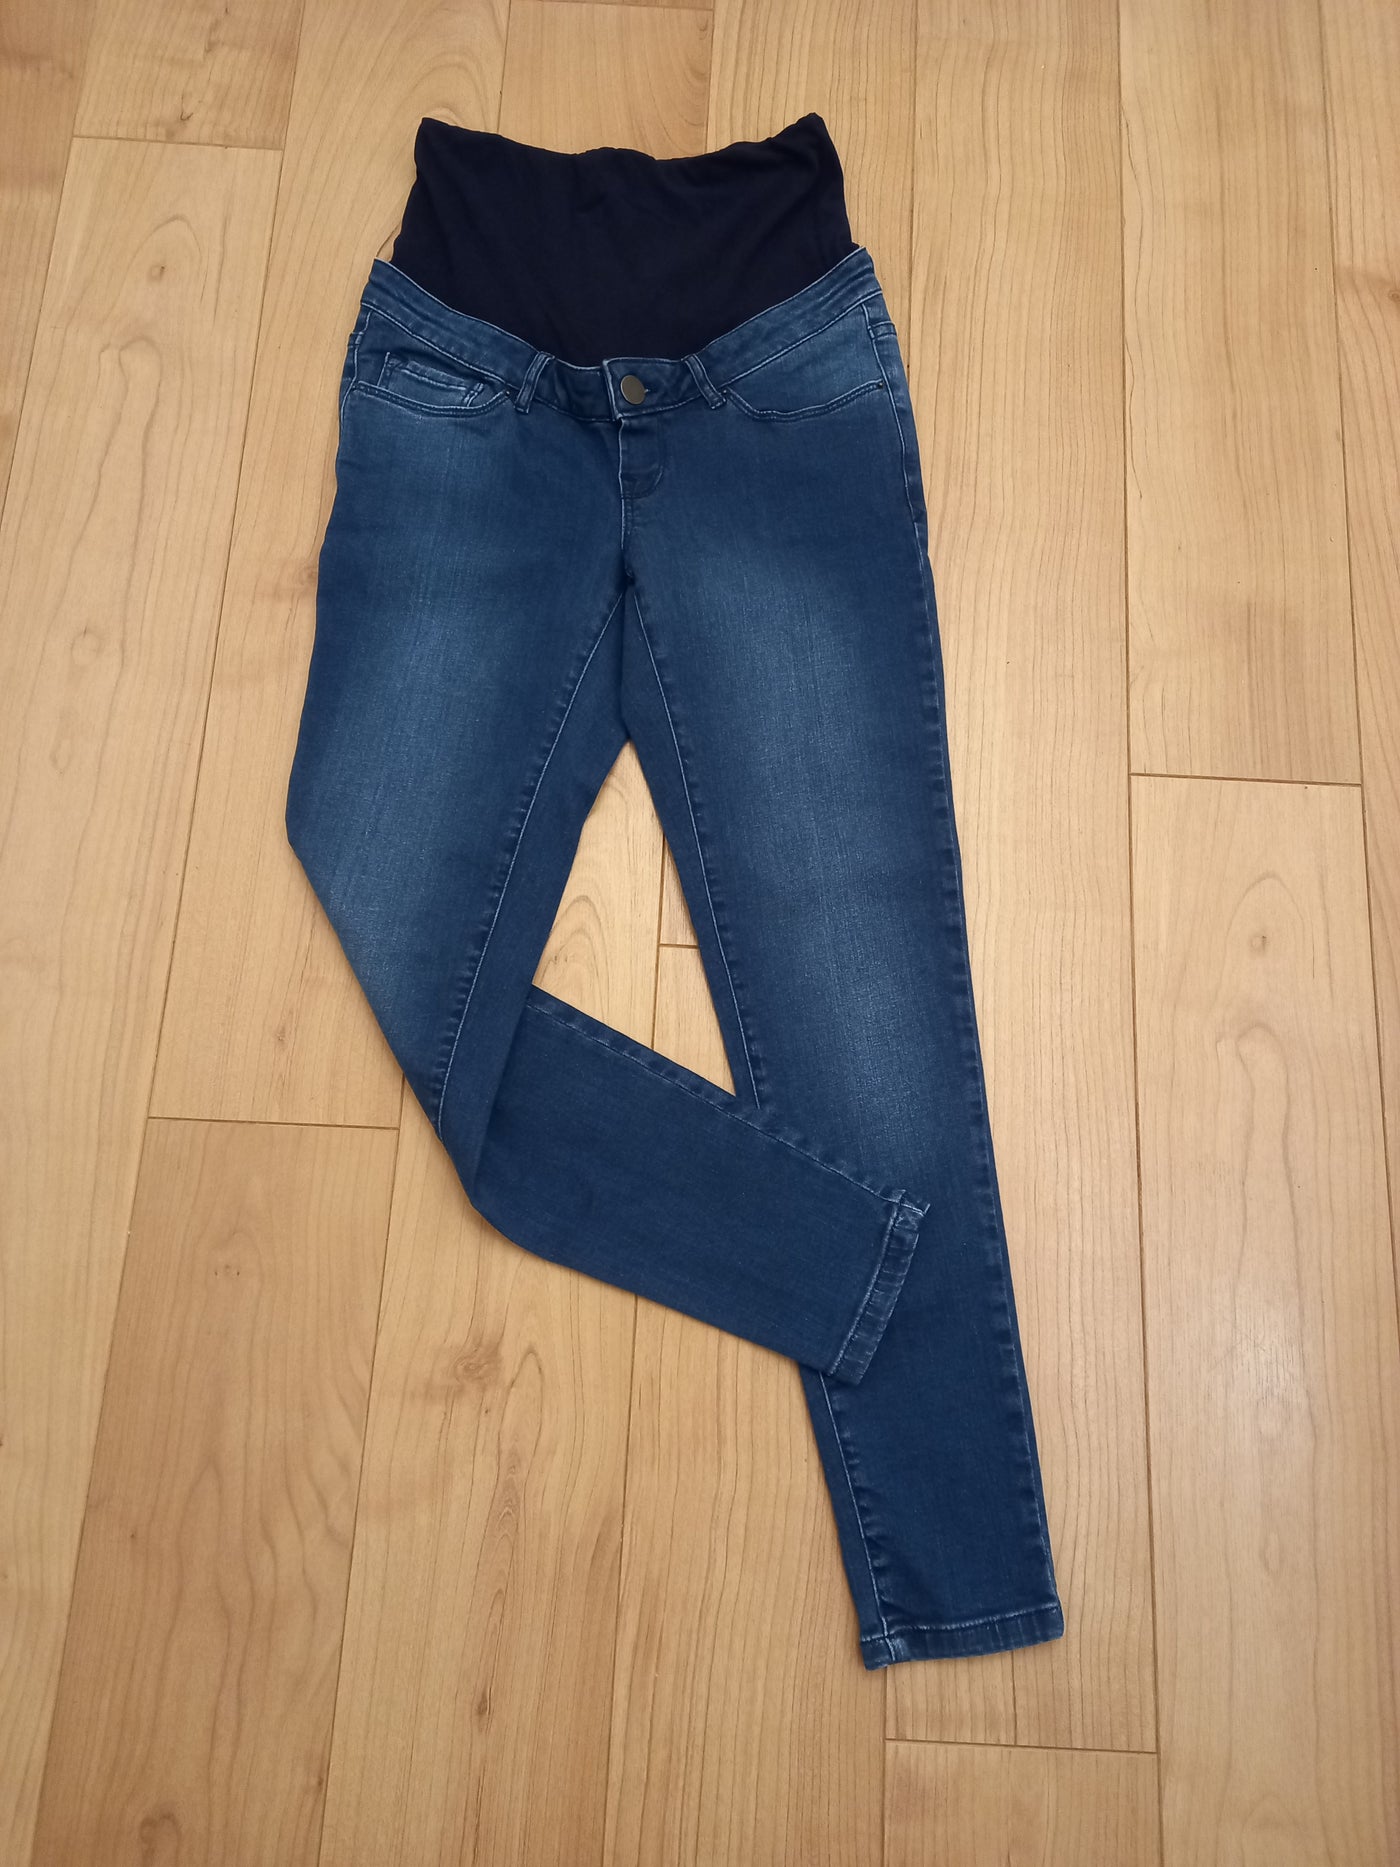 Blooming Marvellous dark blue overbump jeans - Size 10